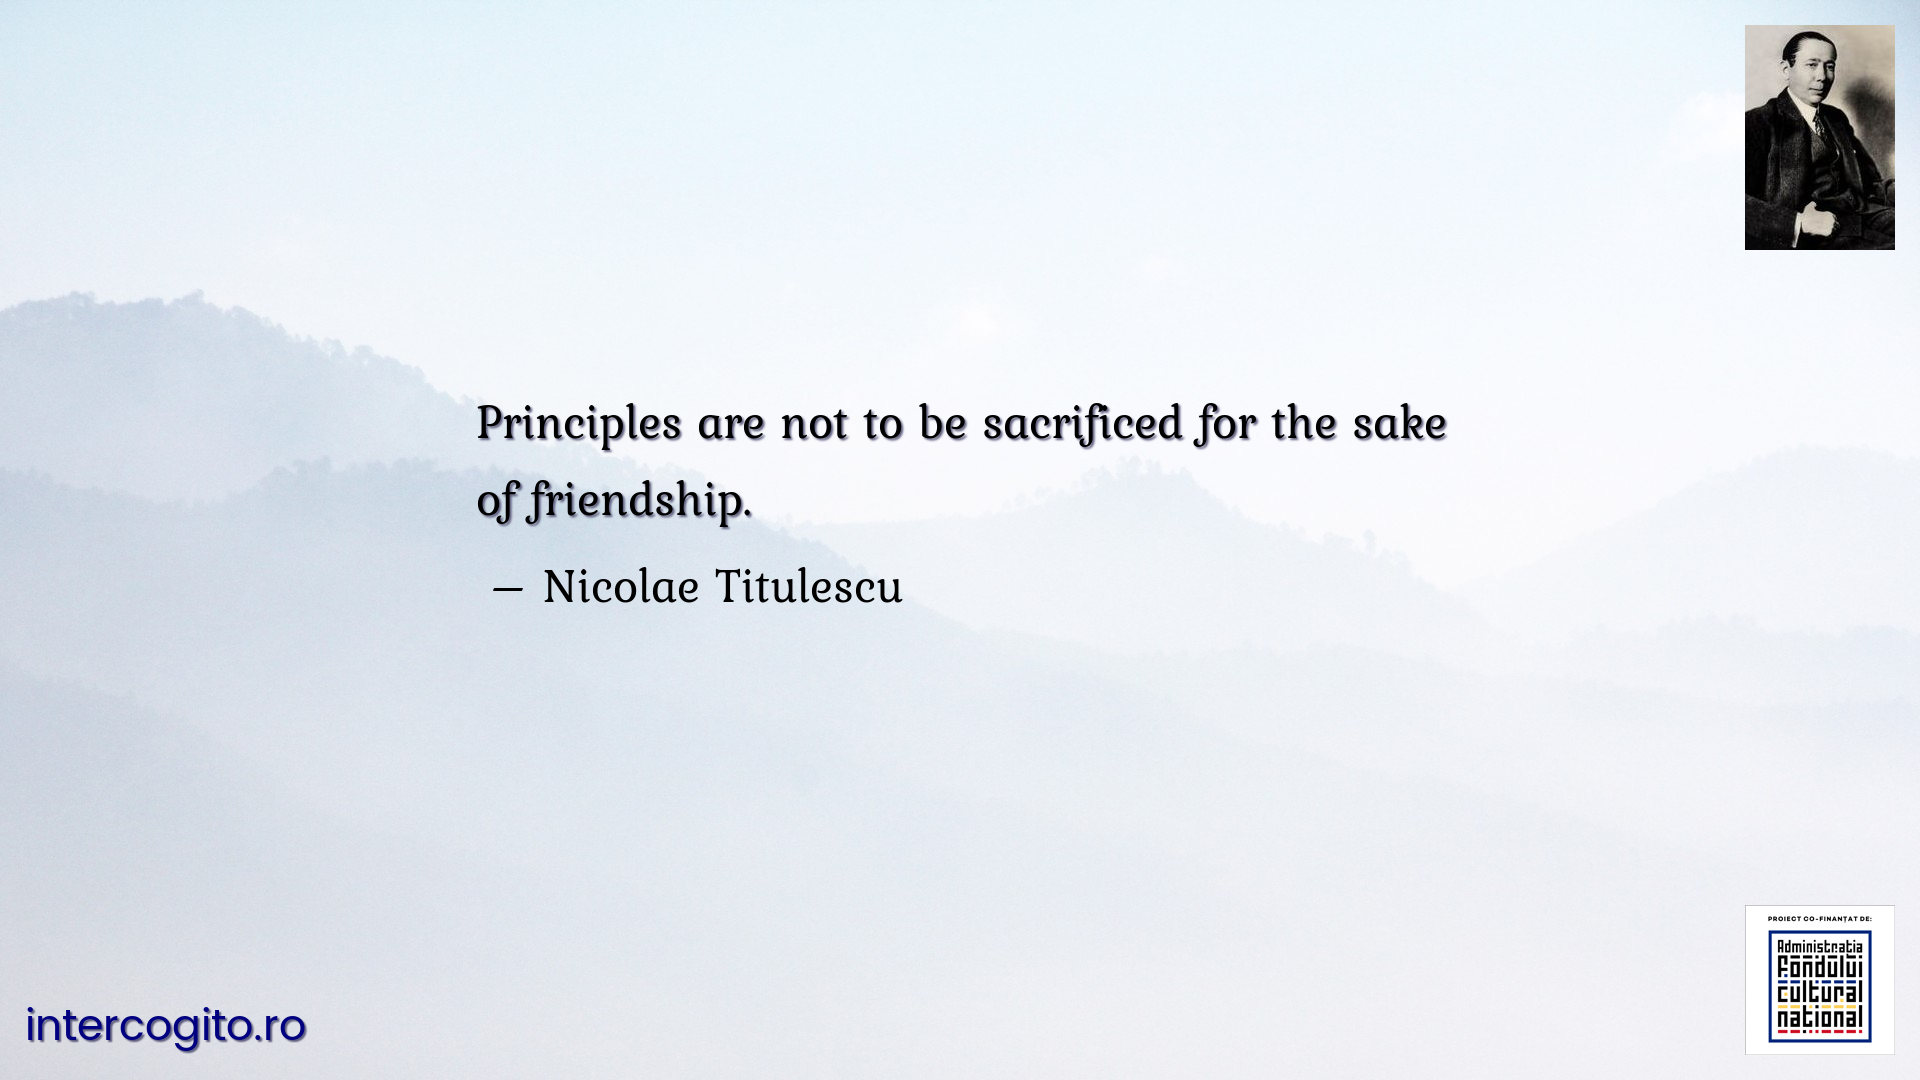 Principles are not to be sacrificed for the sake of friendship.